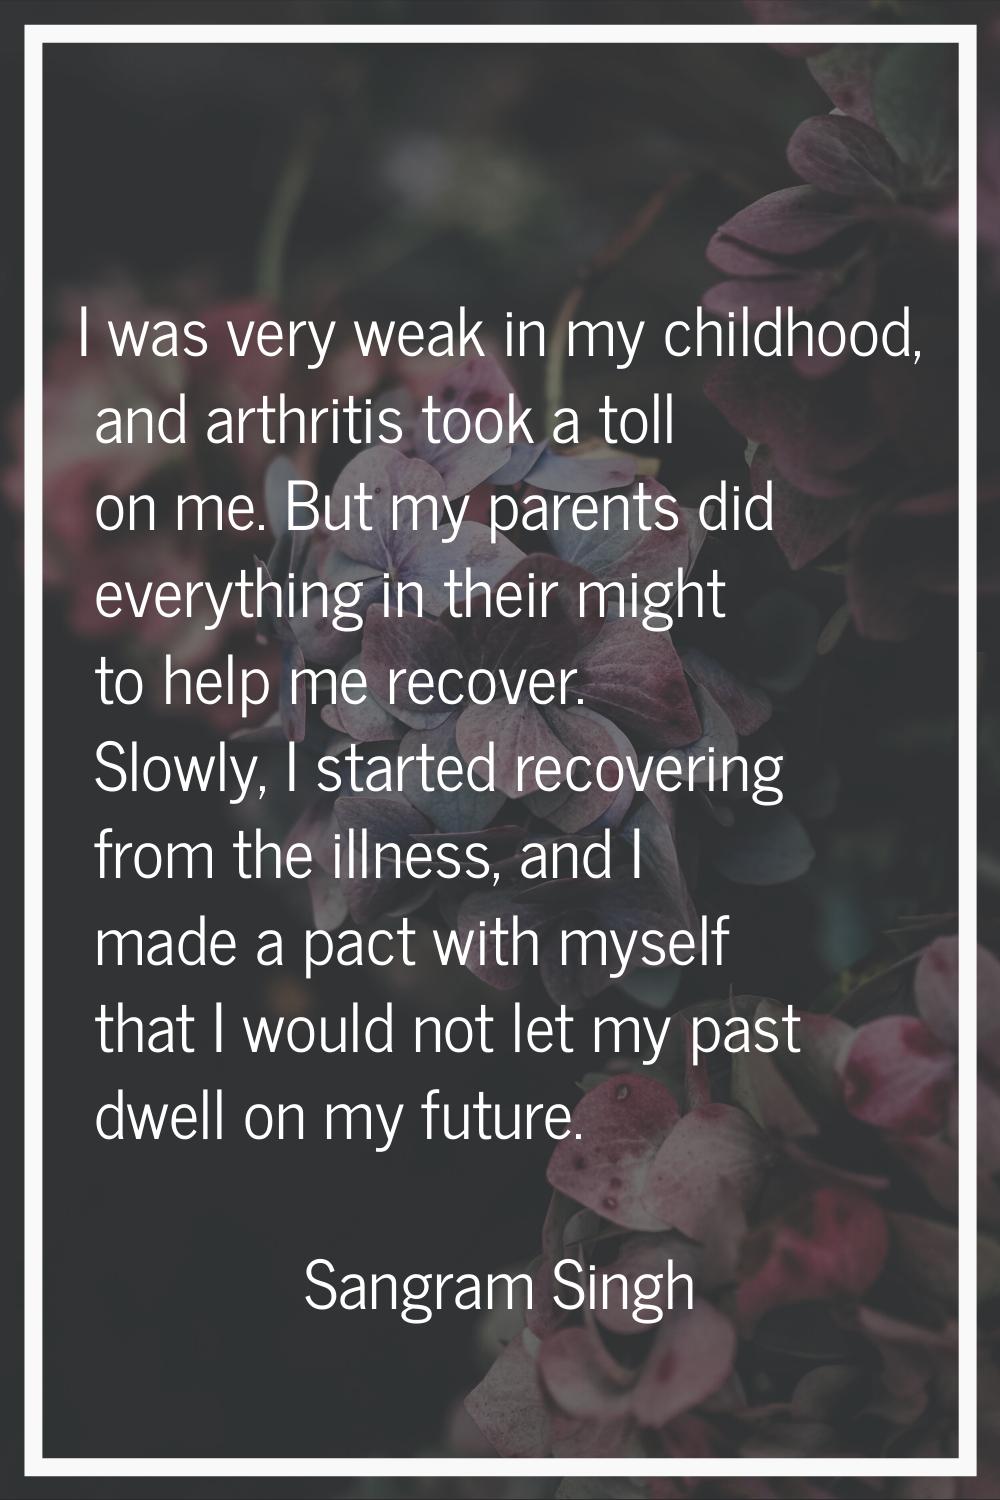 I was very weak in my childhood, and arthritis took a toll on me. But my parents did everything in 